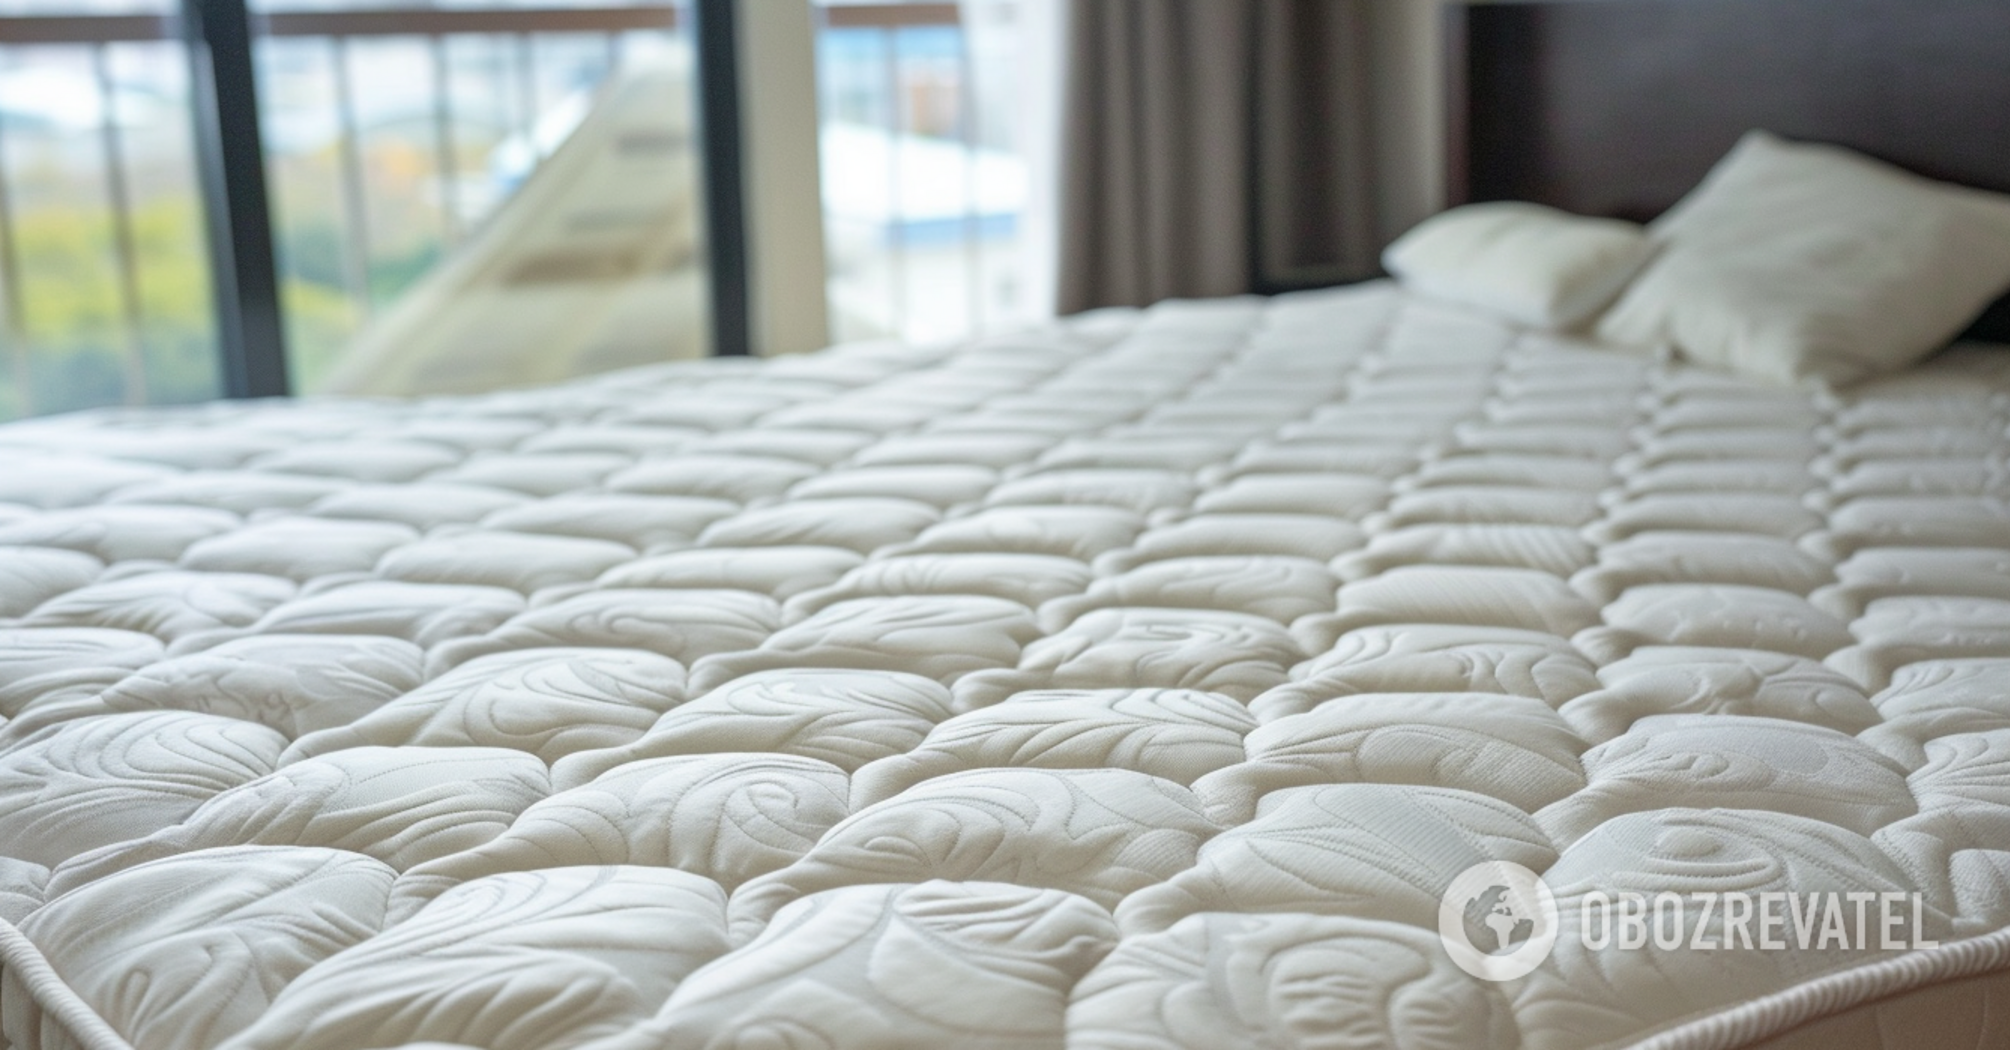 How to perfectly clean your mattress to get rid of dirt and allergens: 7 important tips